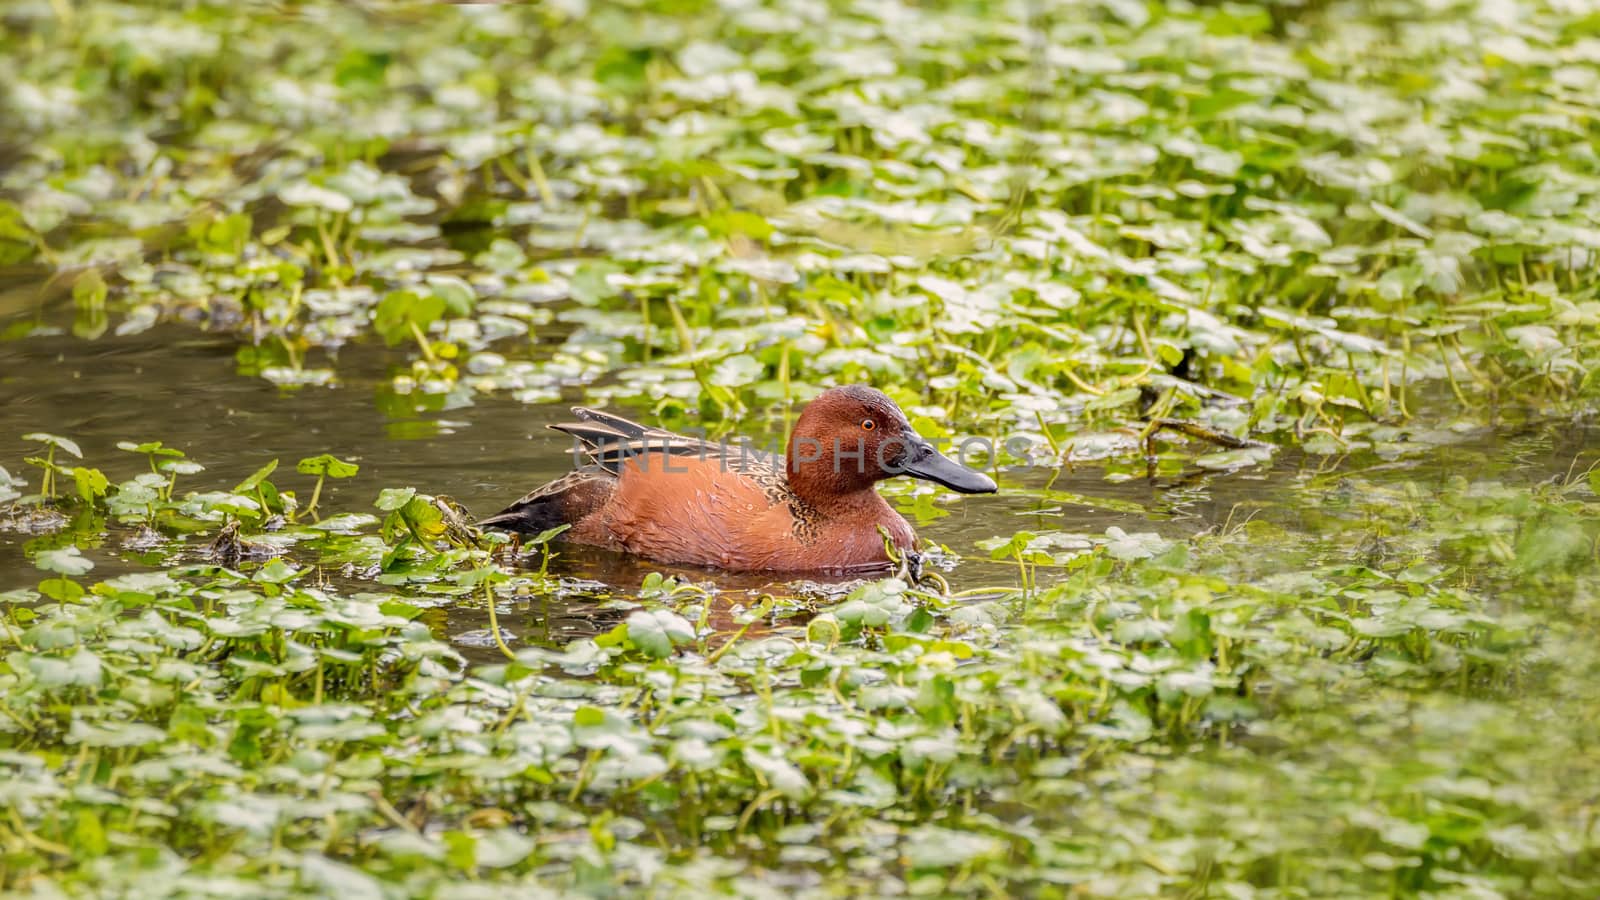 Wild Cinnamon Teal Duck in a Pond by backyard_photography